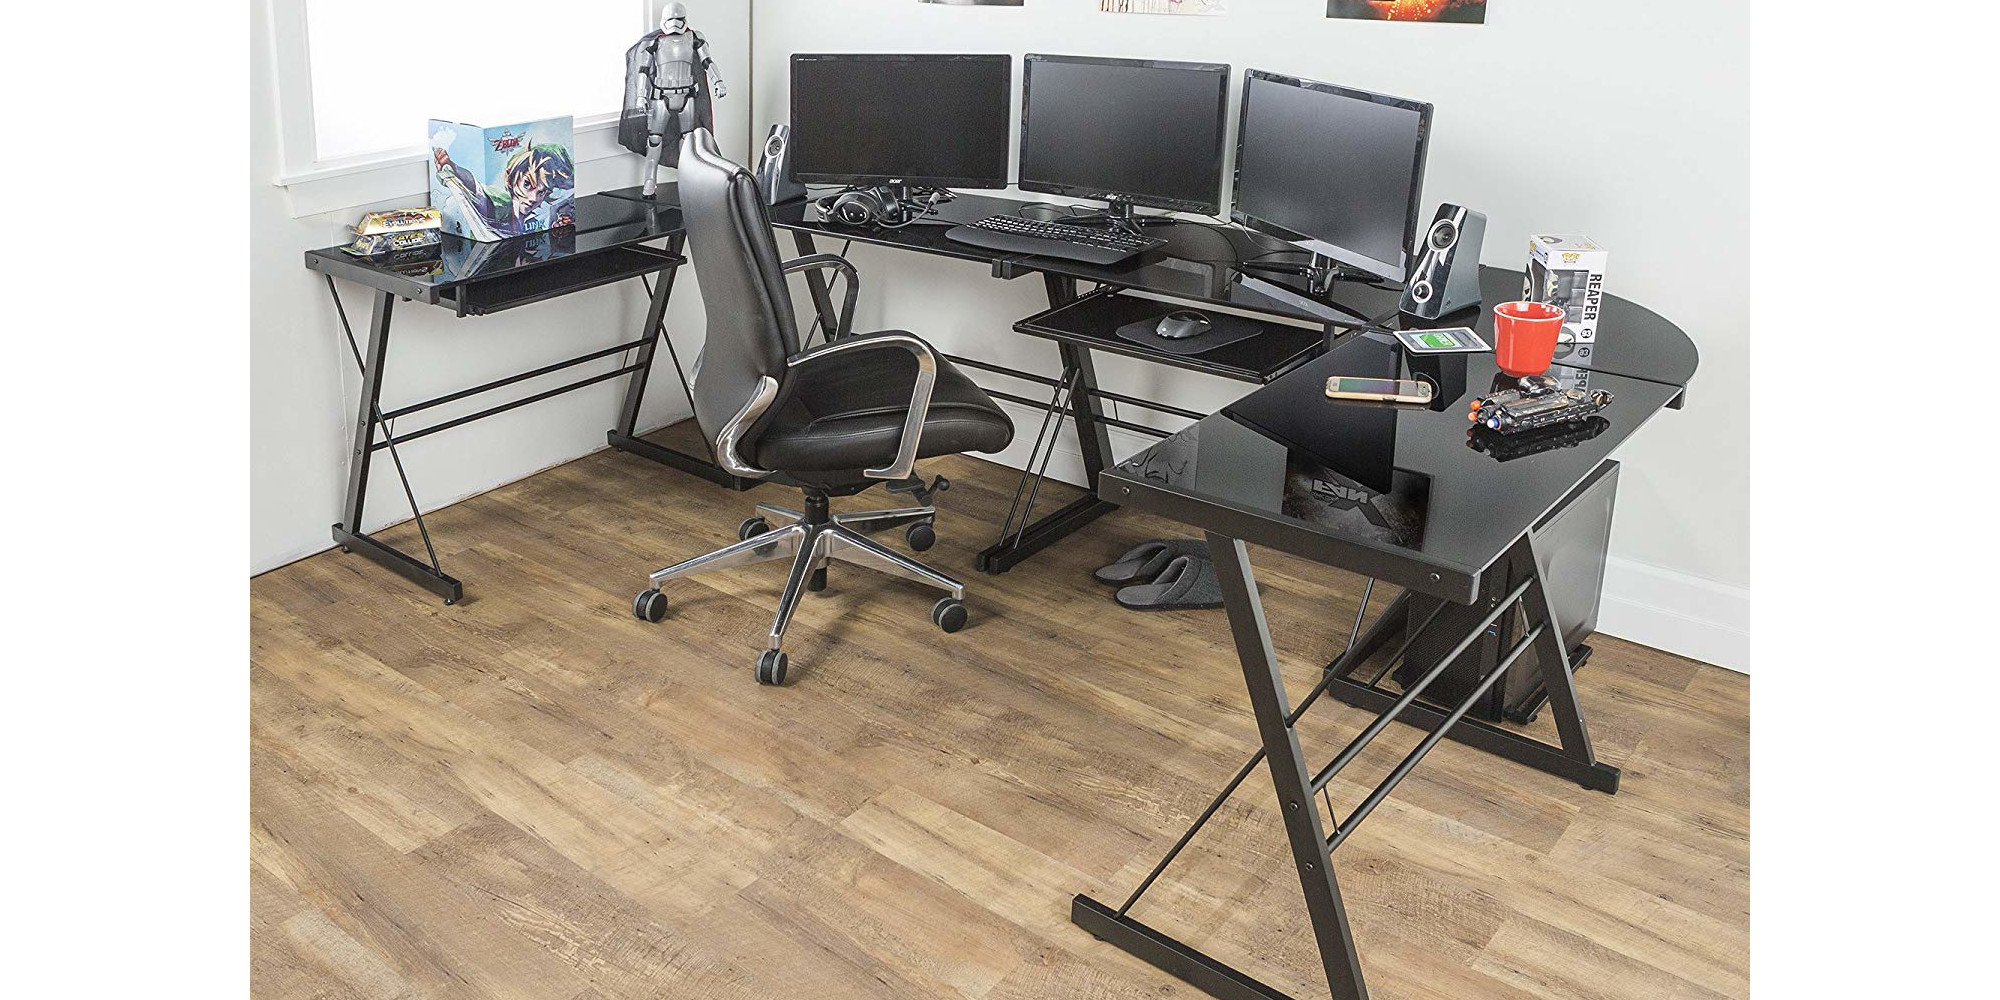 The 5 Best Desks For Video Editing In 2020 Vfx Visuals Blog